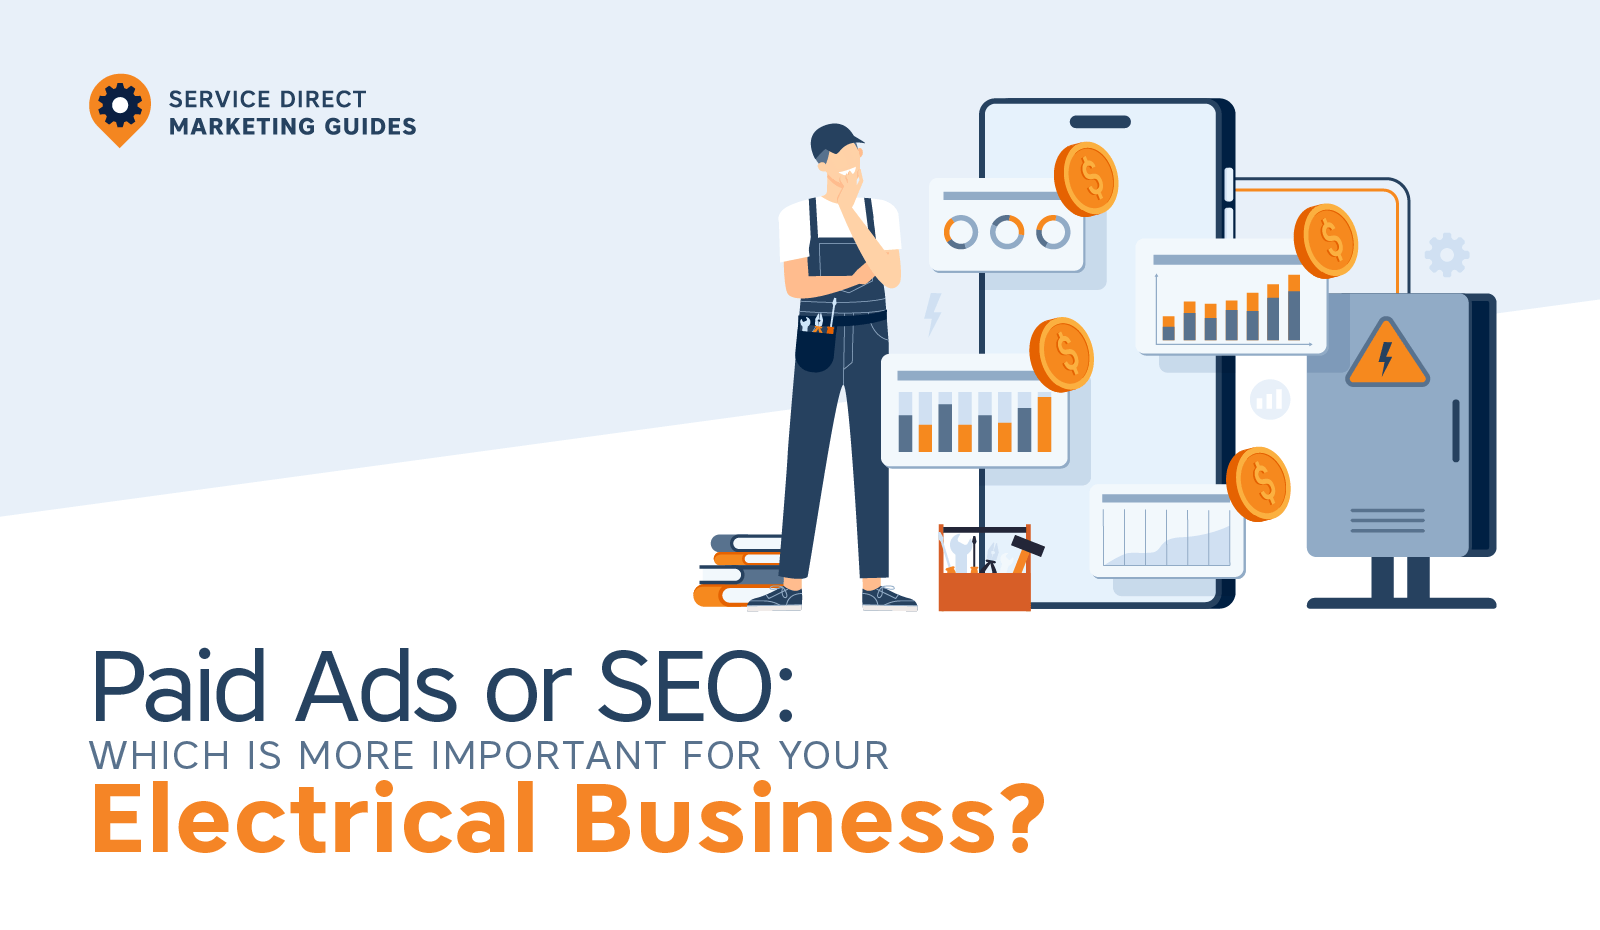 Paid ads or SEO which is more important for your electrical business header